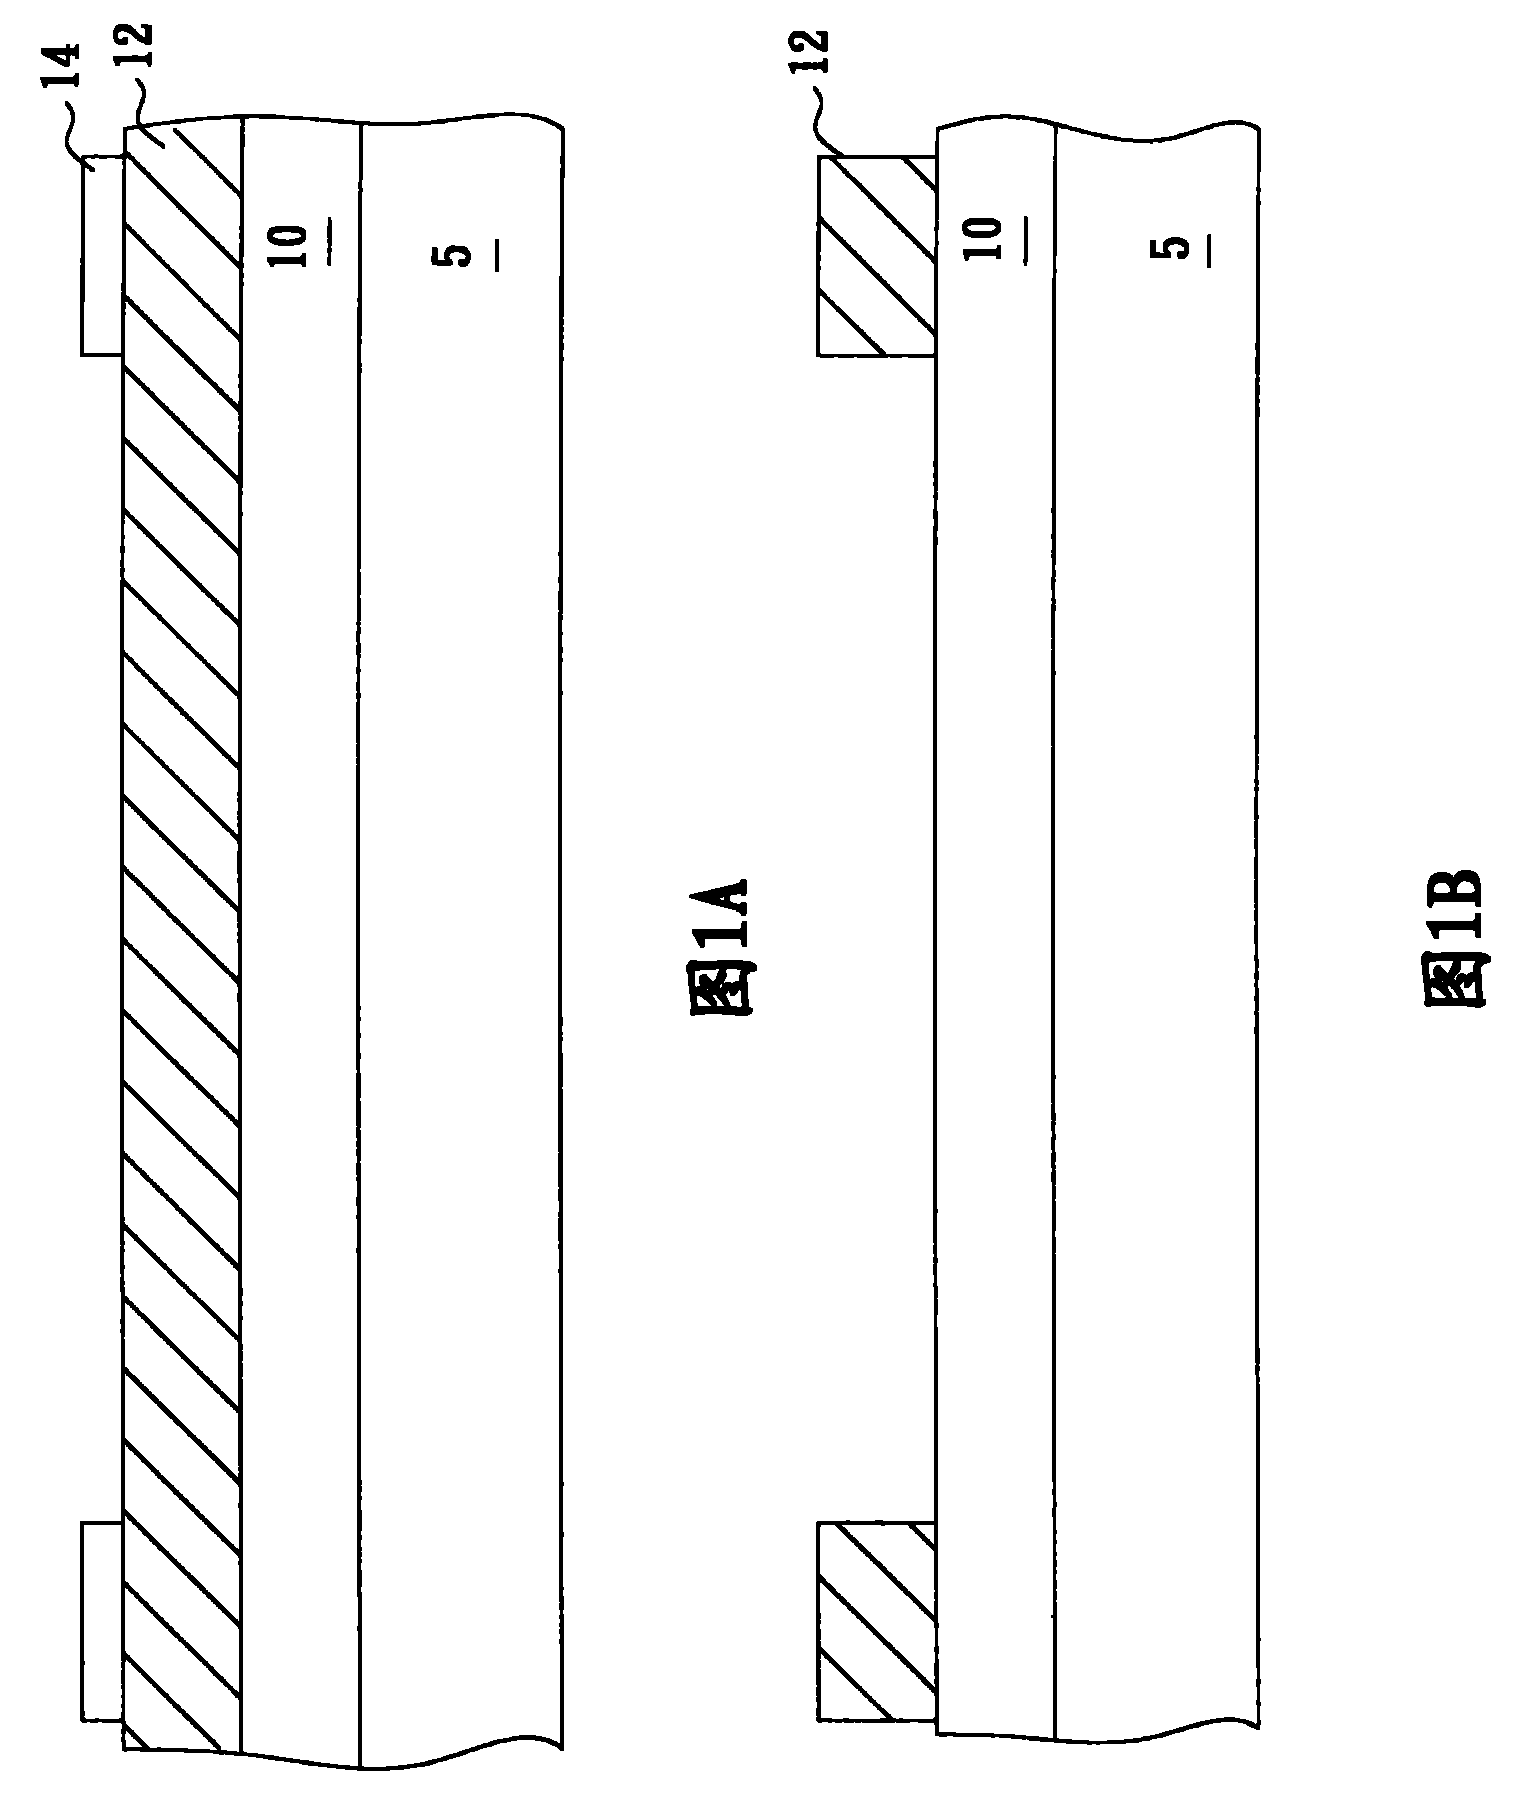 Semiconductor structure and method for manufacturing same